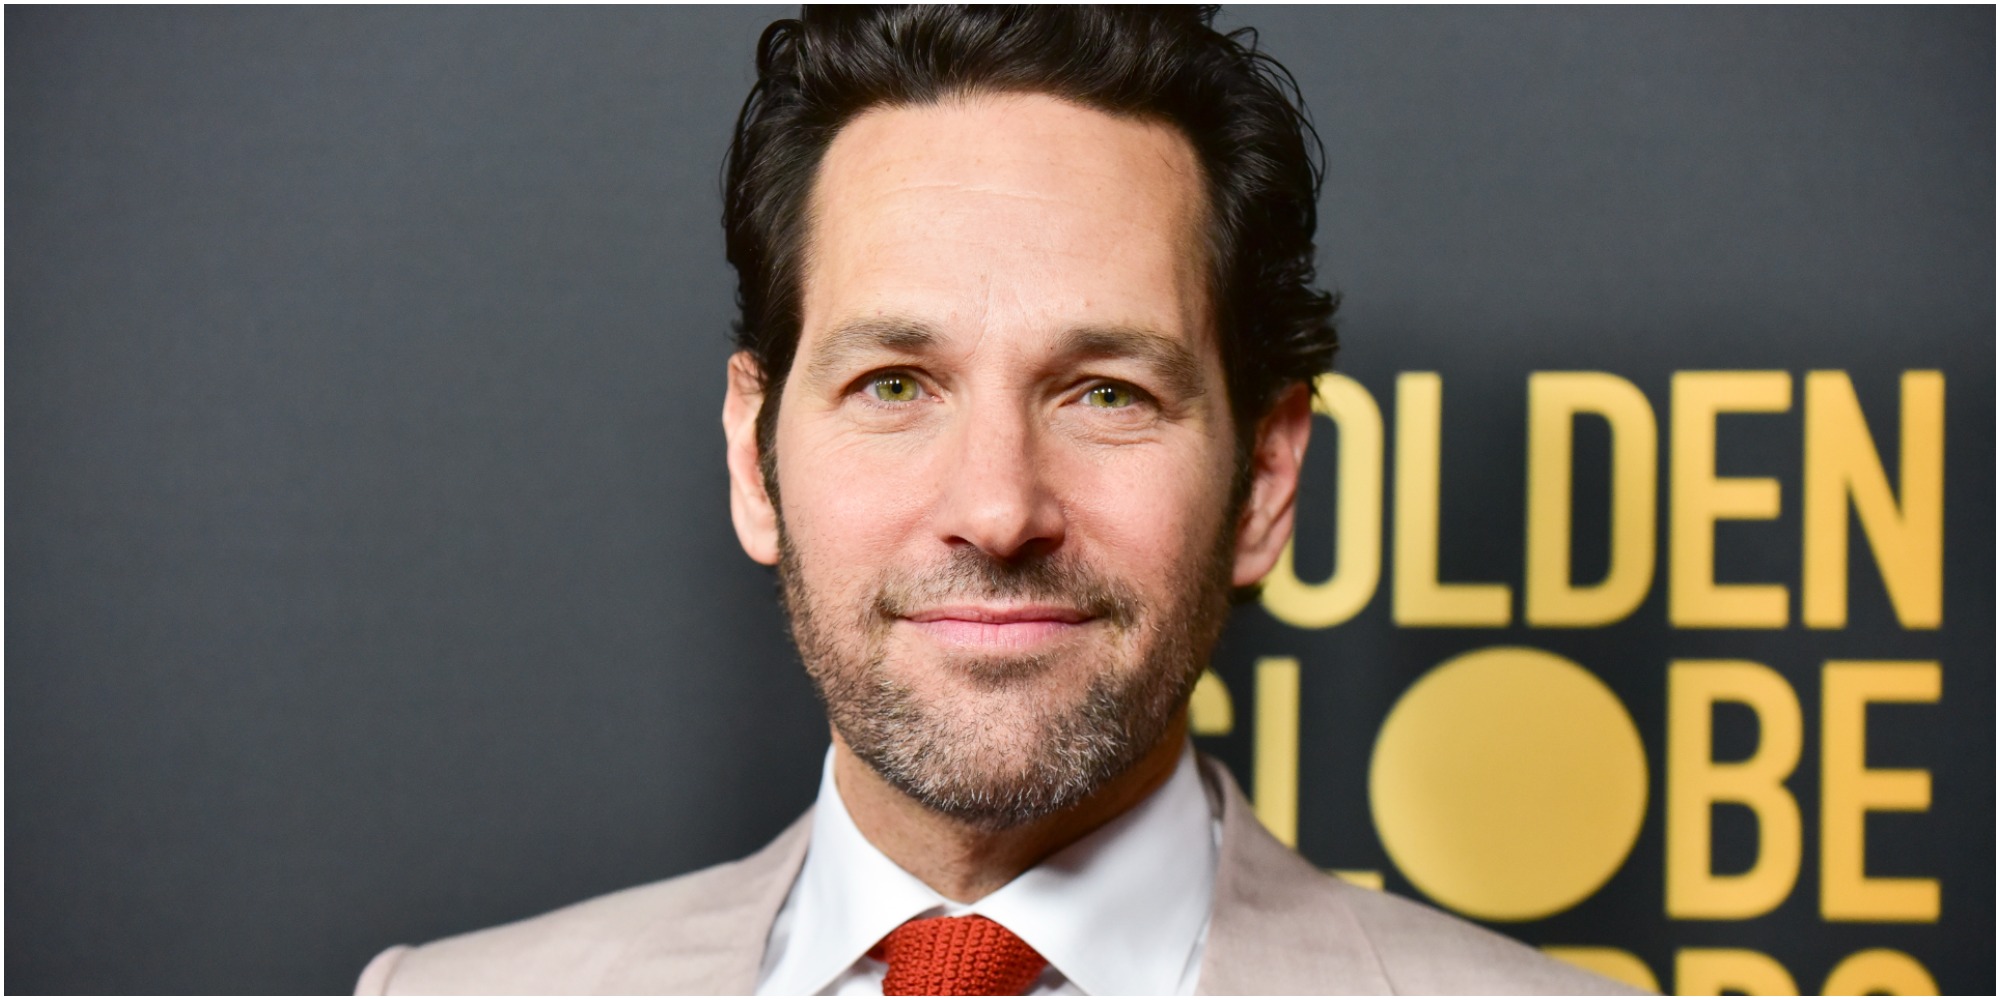 Paul Rudd’s Wife ‘Stupefied’ After Former ‘Friends’ Star Named People’s Sexiest Man Alive 2021